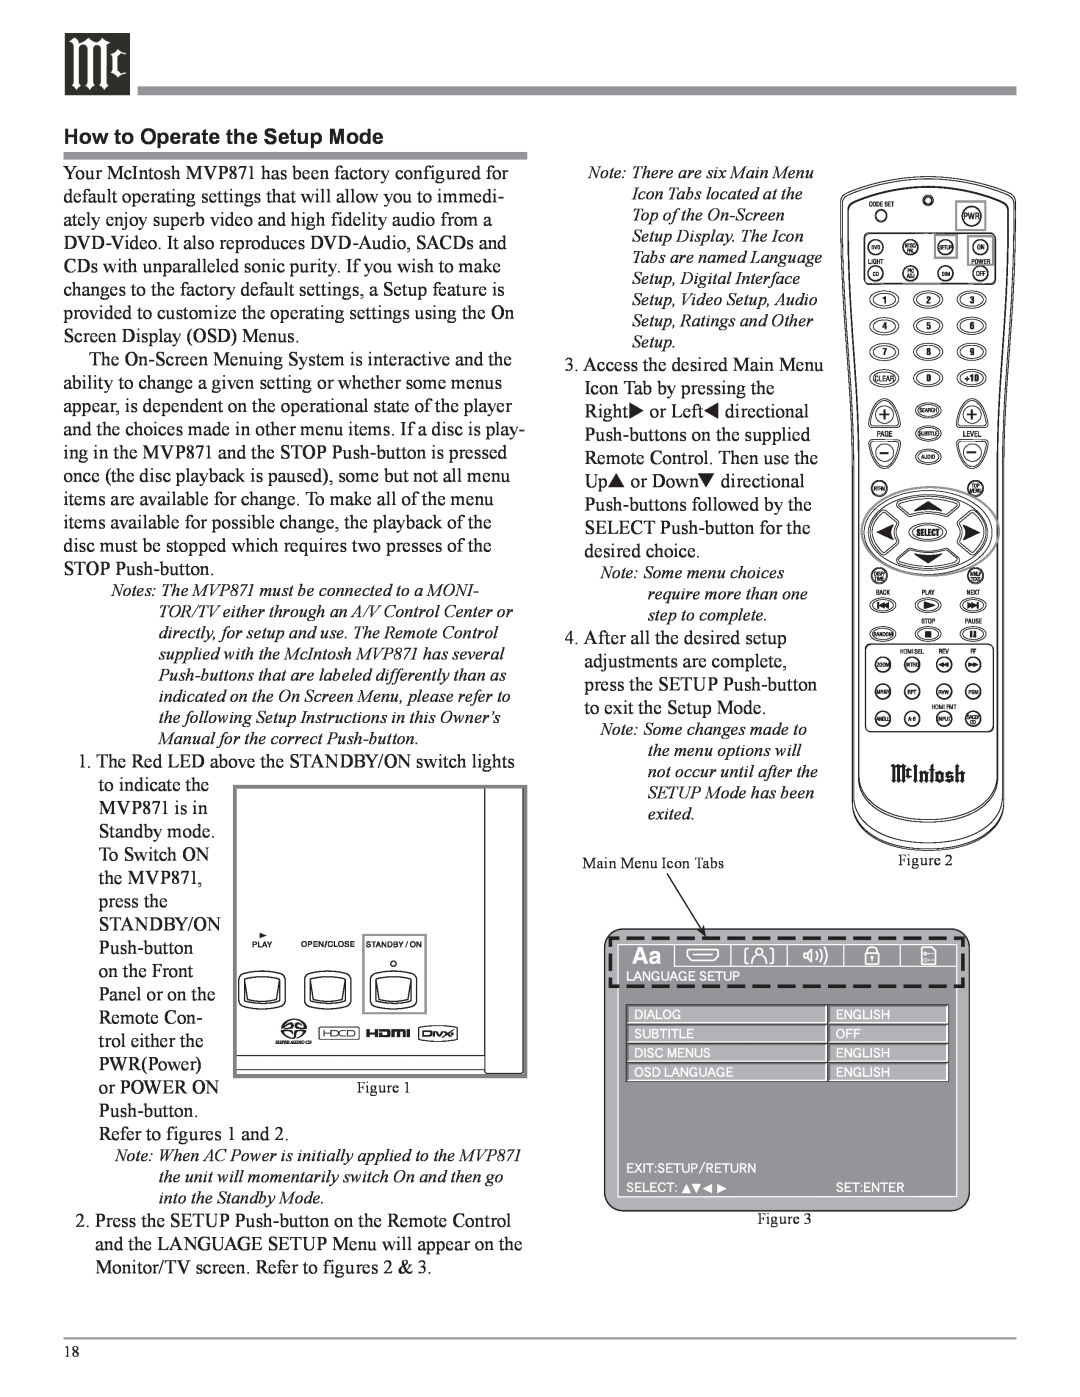 McIntosh MVP871 owner manual How to Operate the Setup Mode 